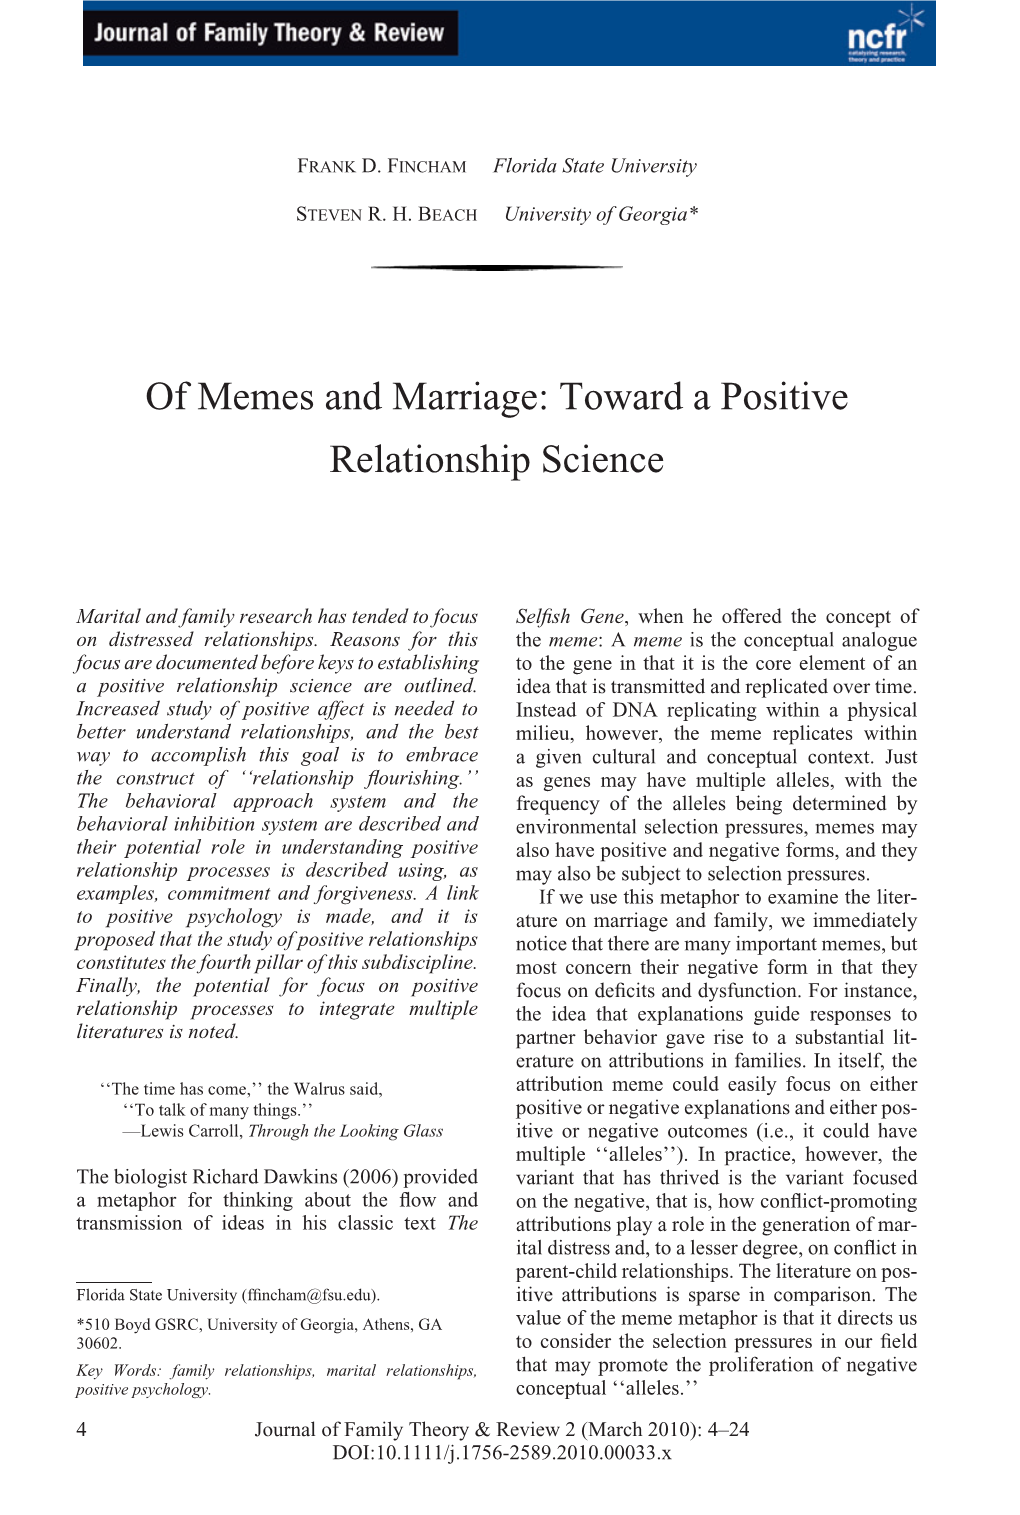 Of Memes and Marriage: Toward a Positive Relationship Science